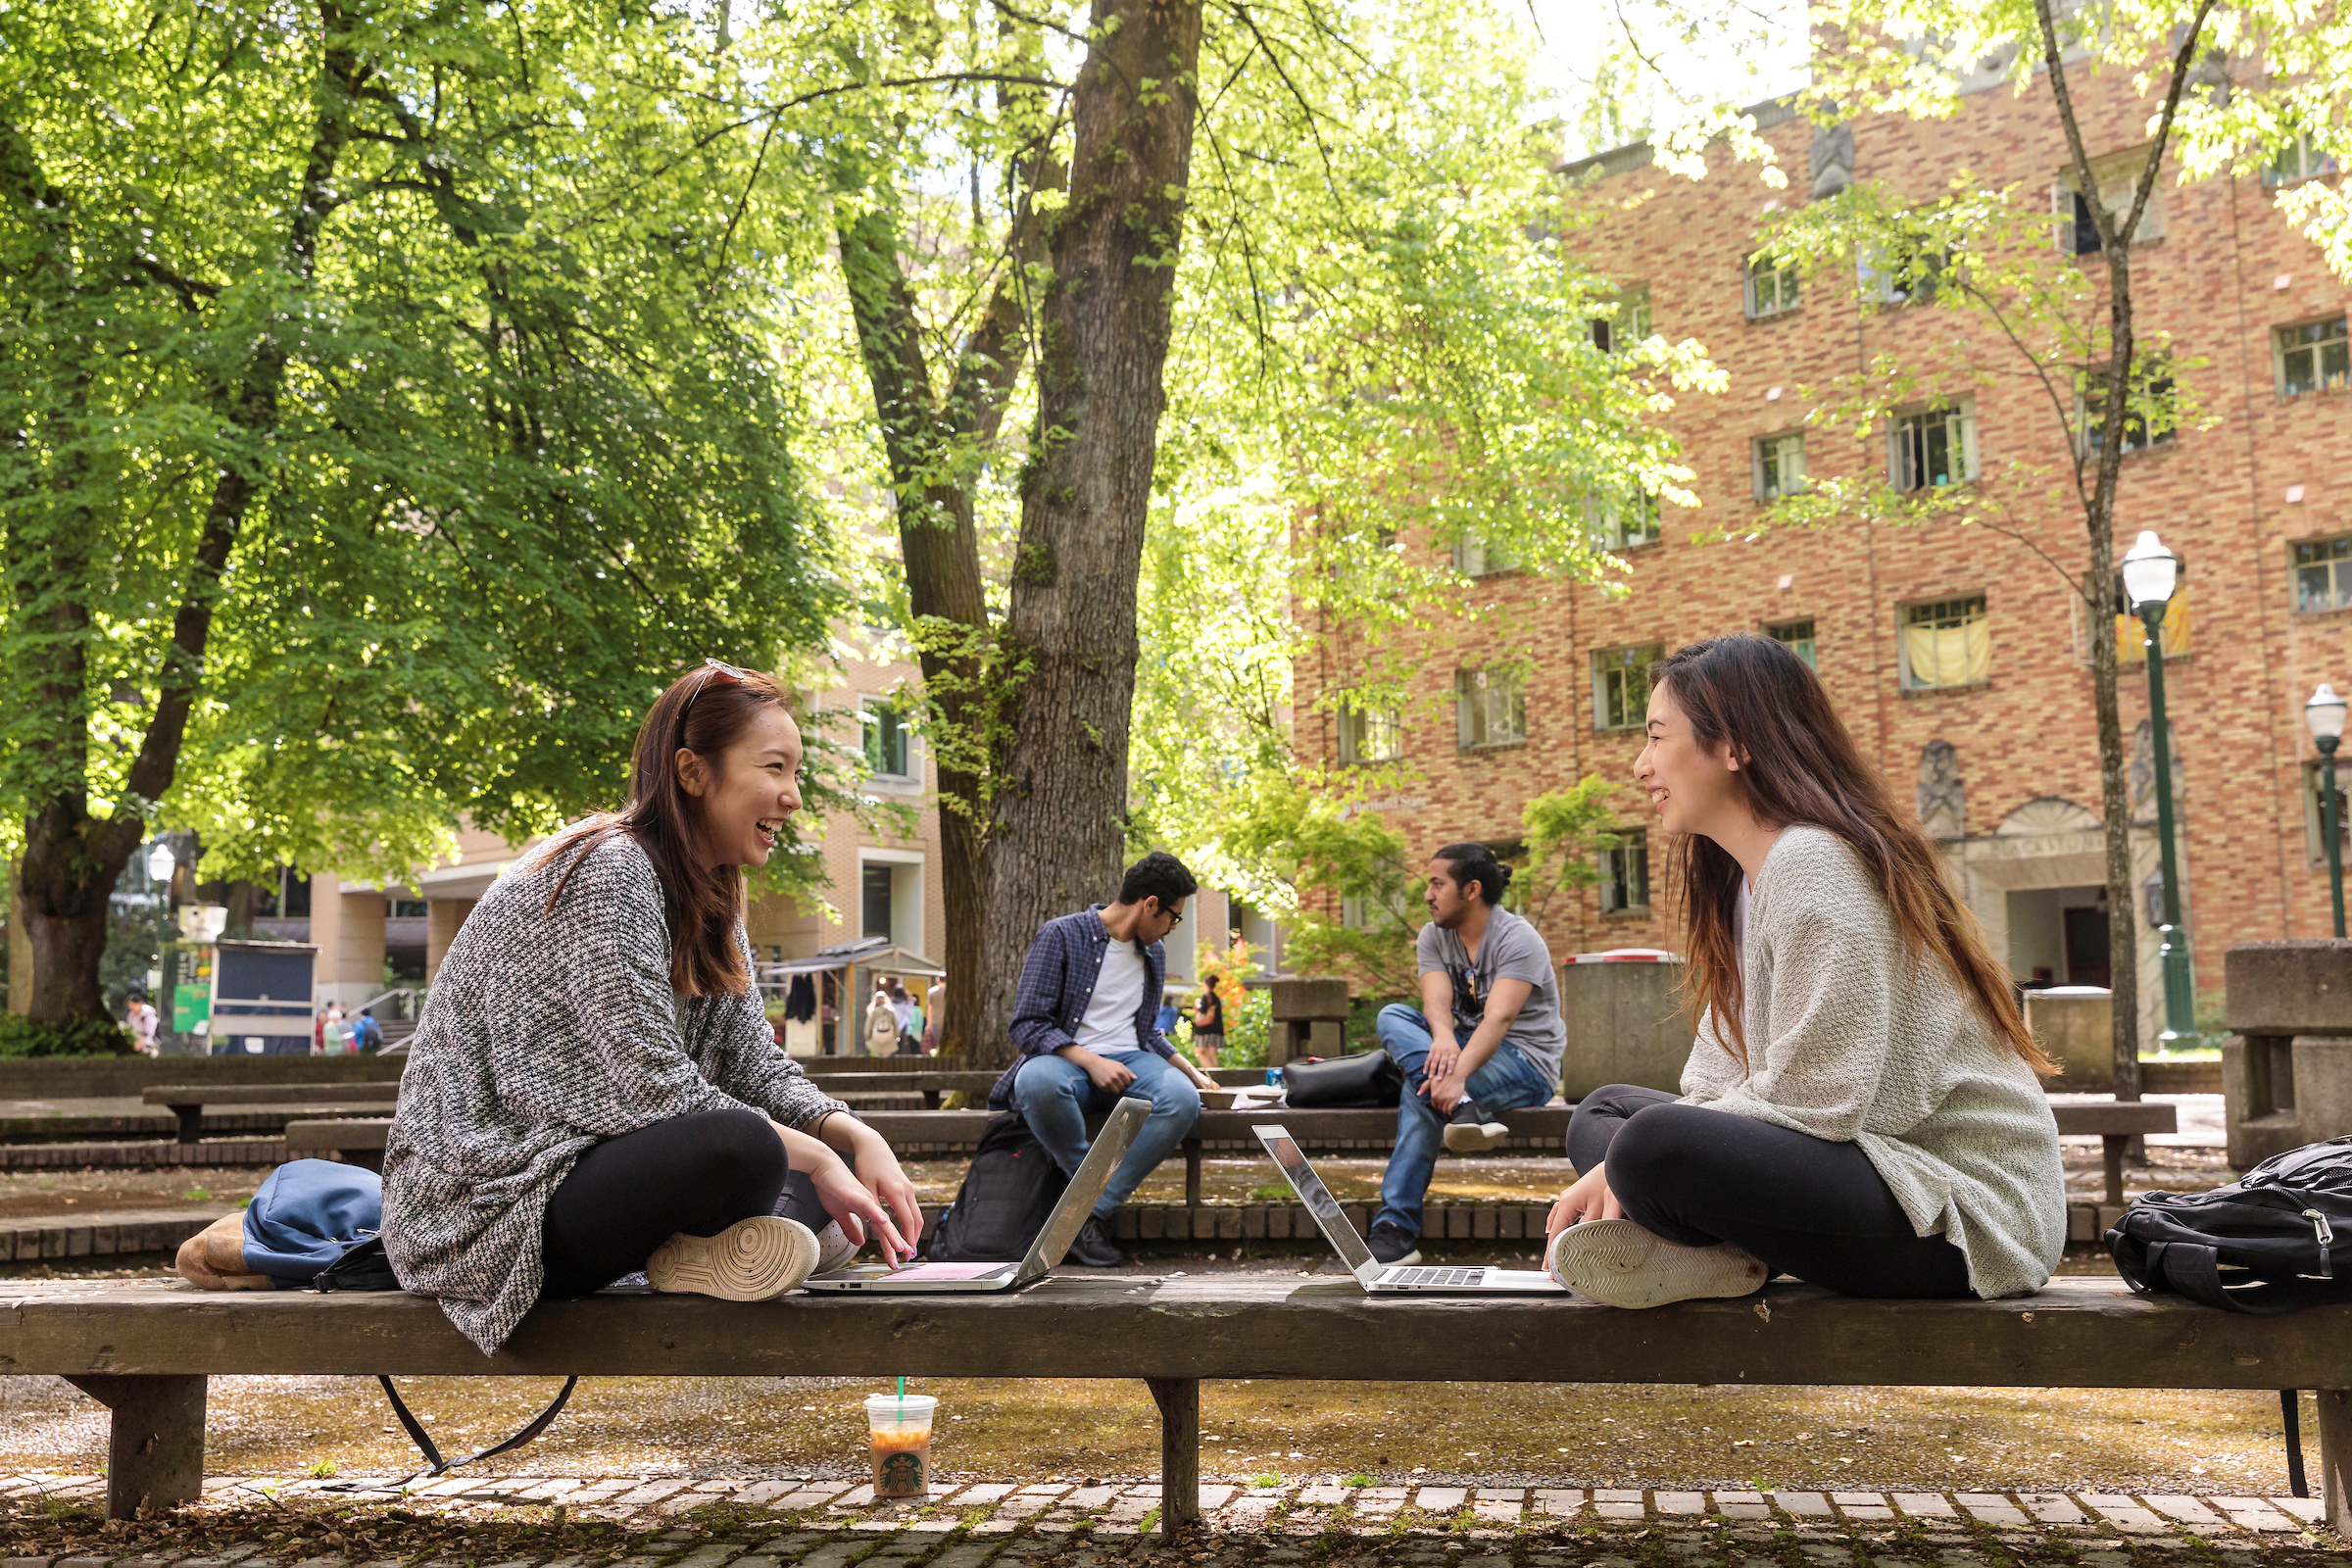 Students conversing on campus